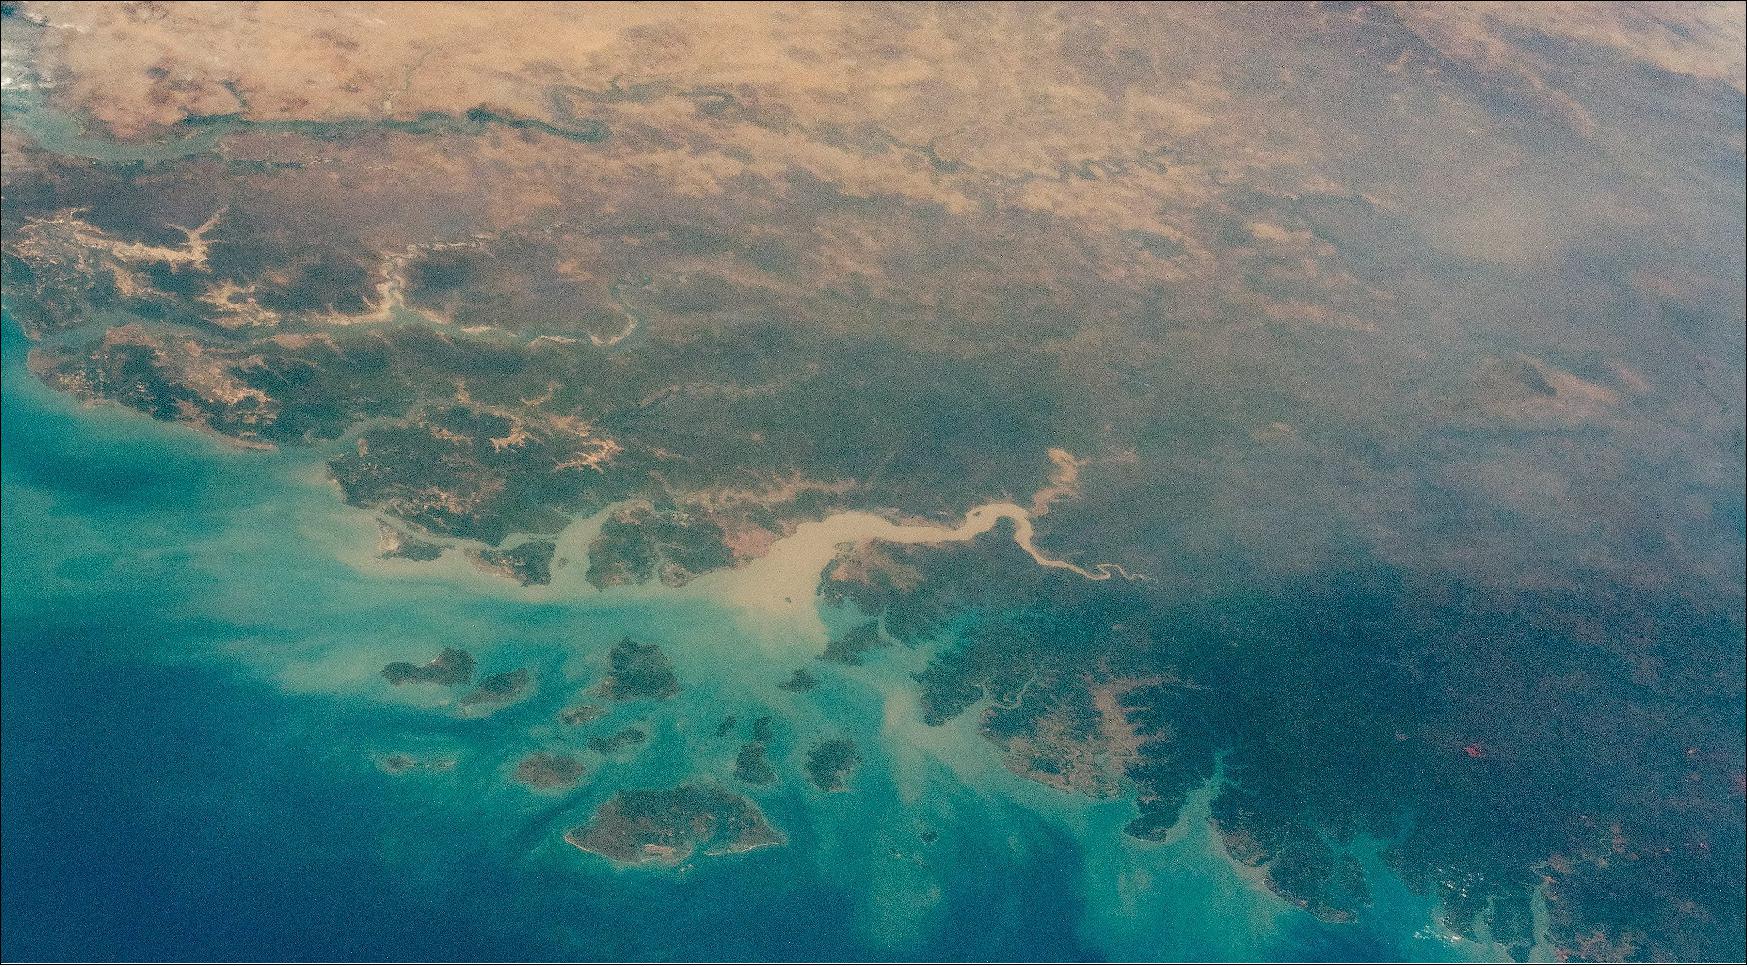 Figure 10: An astronaut aboard the International Space Station (ISS) took this oblique photograph that shows most of the West African country of Guinea-Bissau, along with neighboring Guinea, The Gambia and Senegal, and the southern part of Mauritania. This scene stretches from the green forest vegetation and wet climates of the Atlantic coast to the almost vegetation-less landscapes of the Sahara Desert (image credit: NASA)